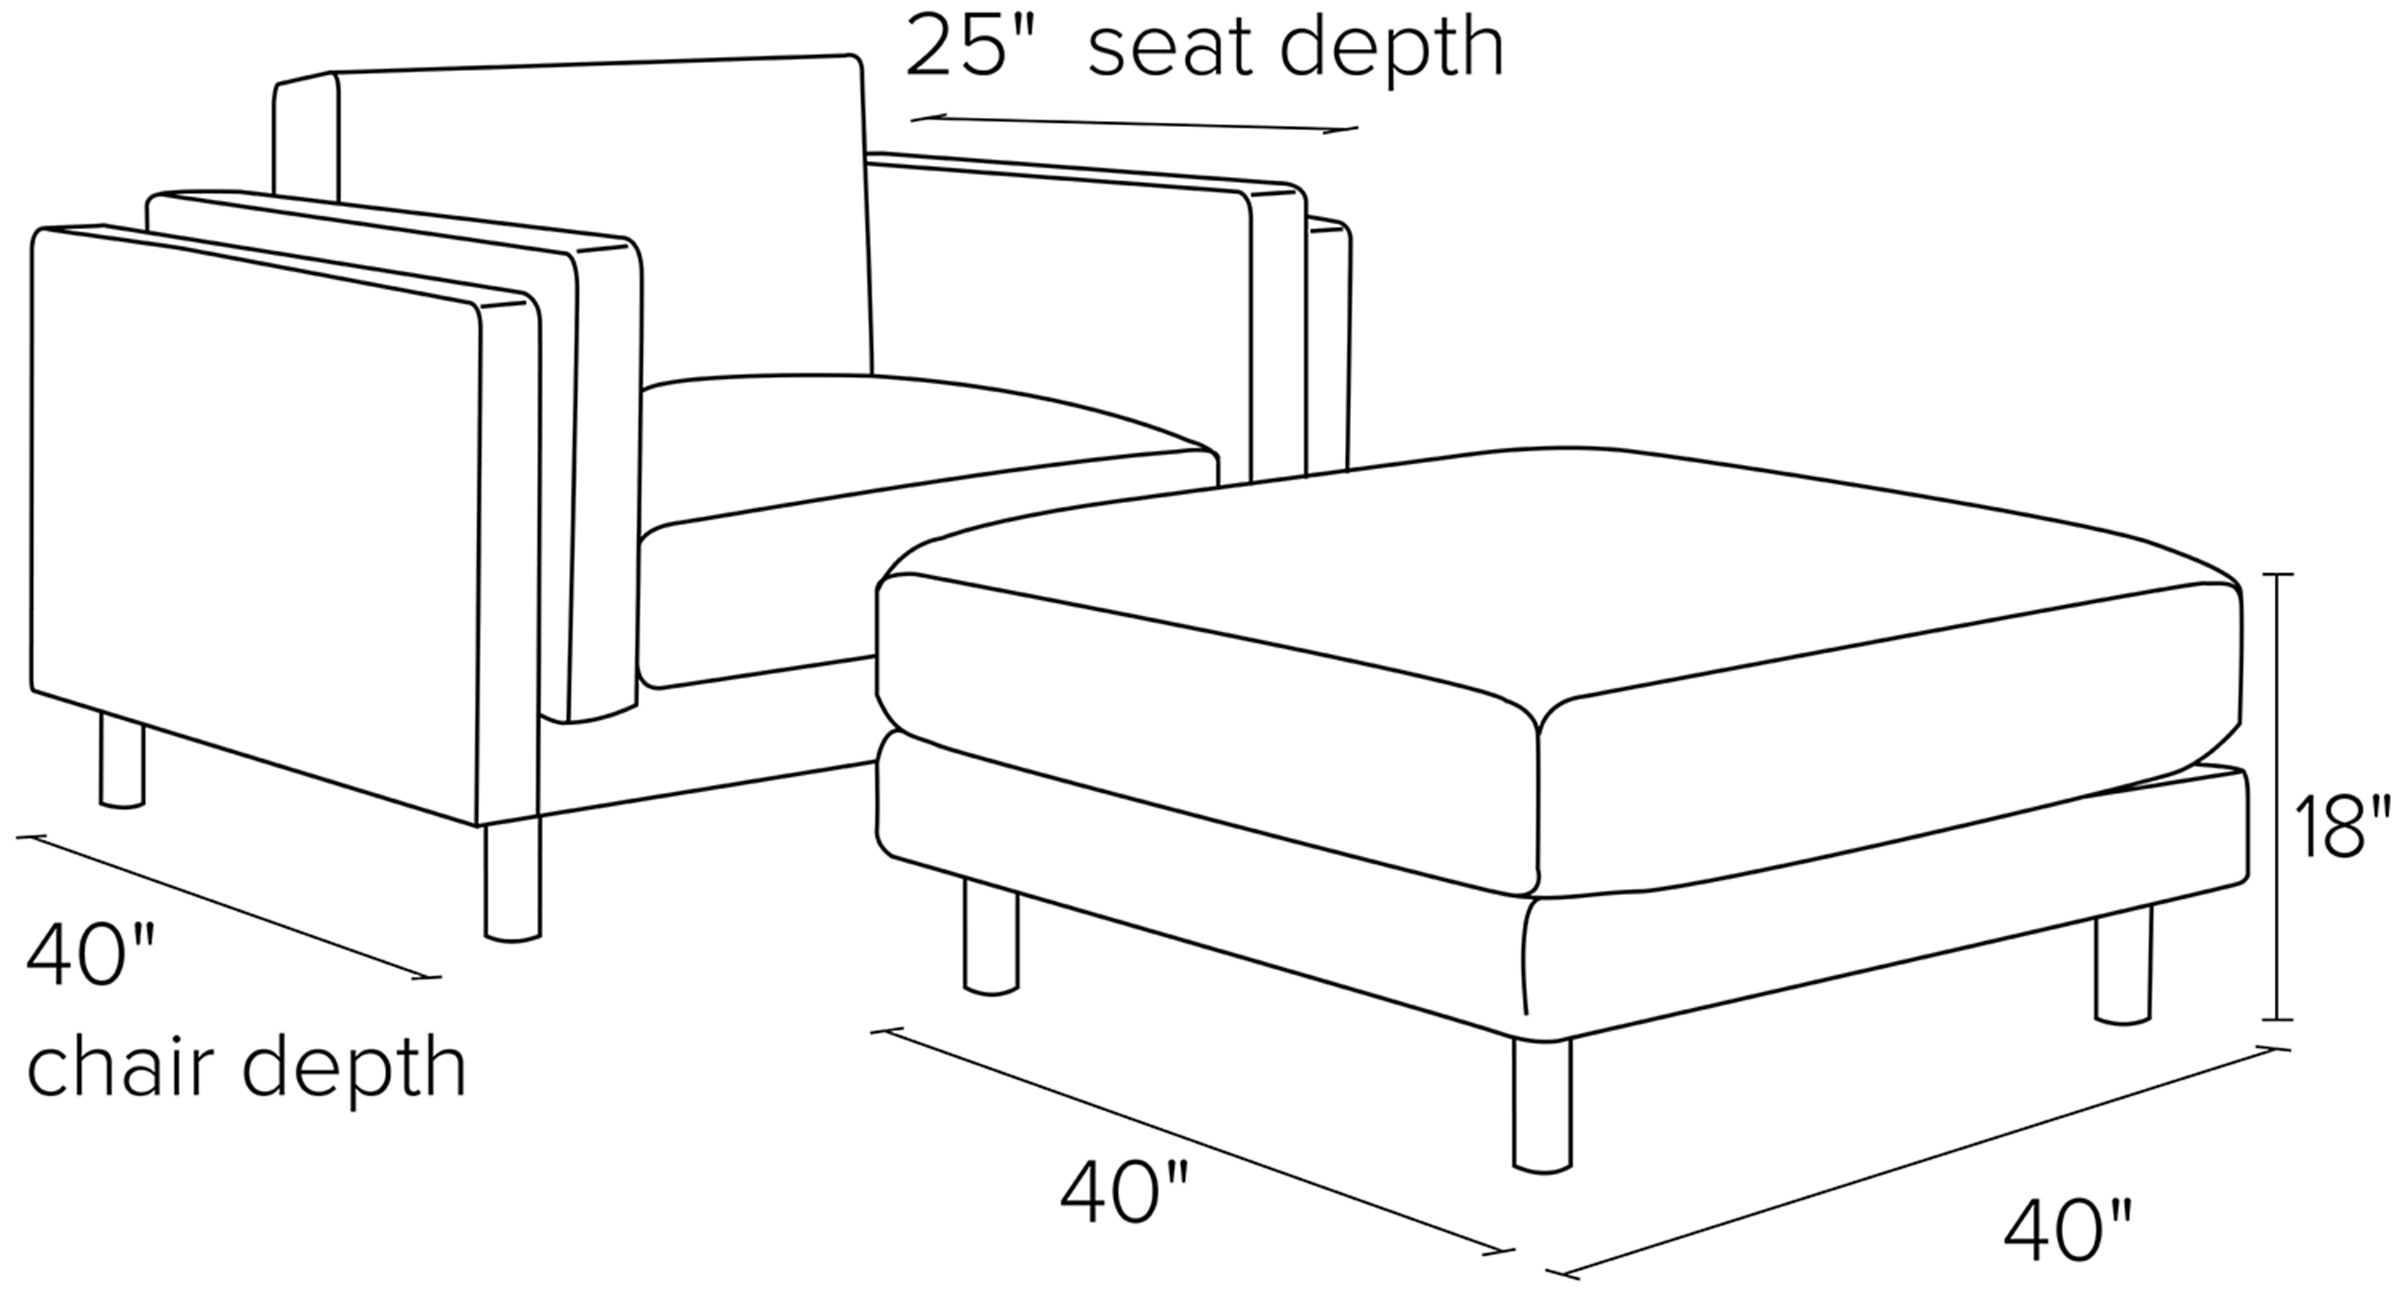 Side view dimension illustration of Cade chair and ottoman.